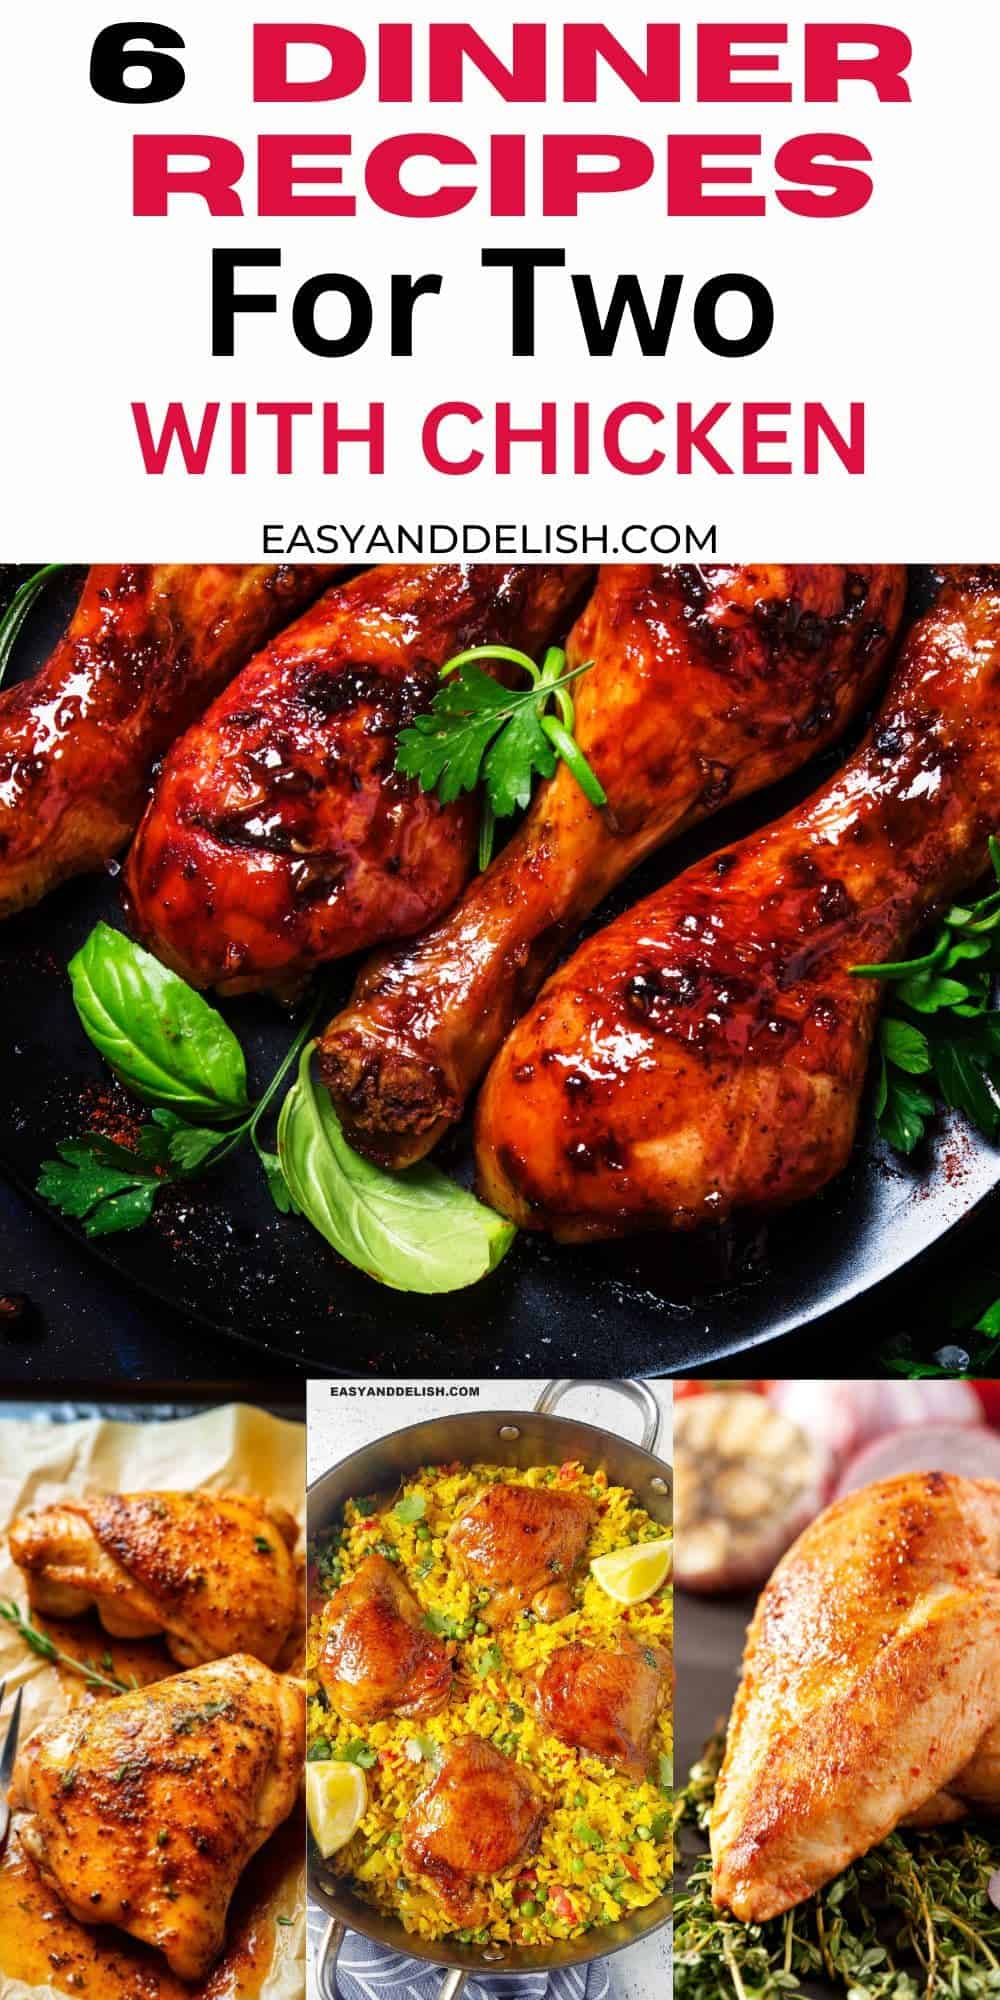 25+ Easy Healthy Dinner Recipes for Two - Easy and Delish